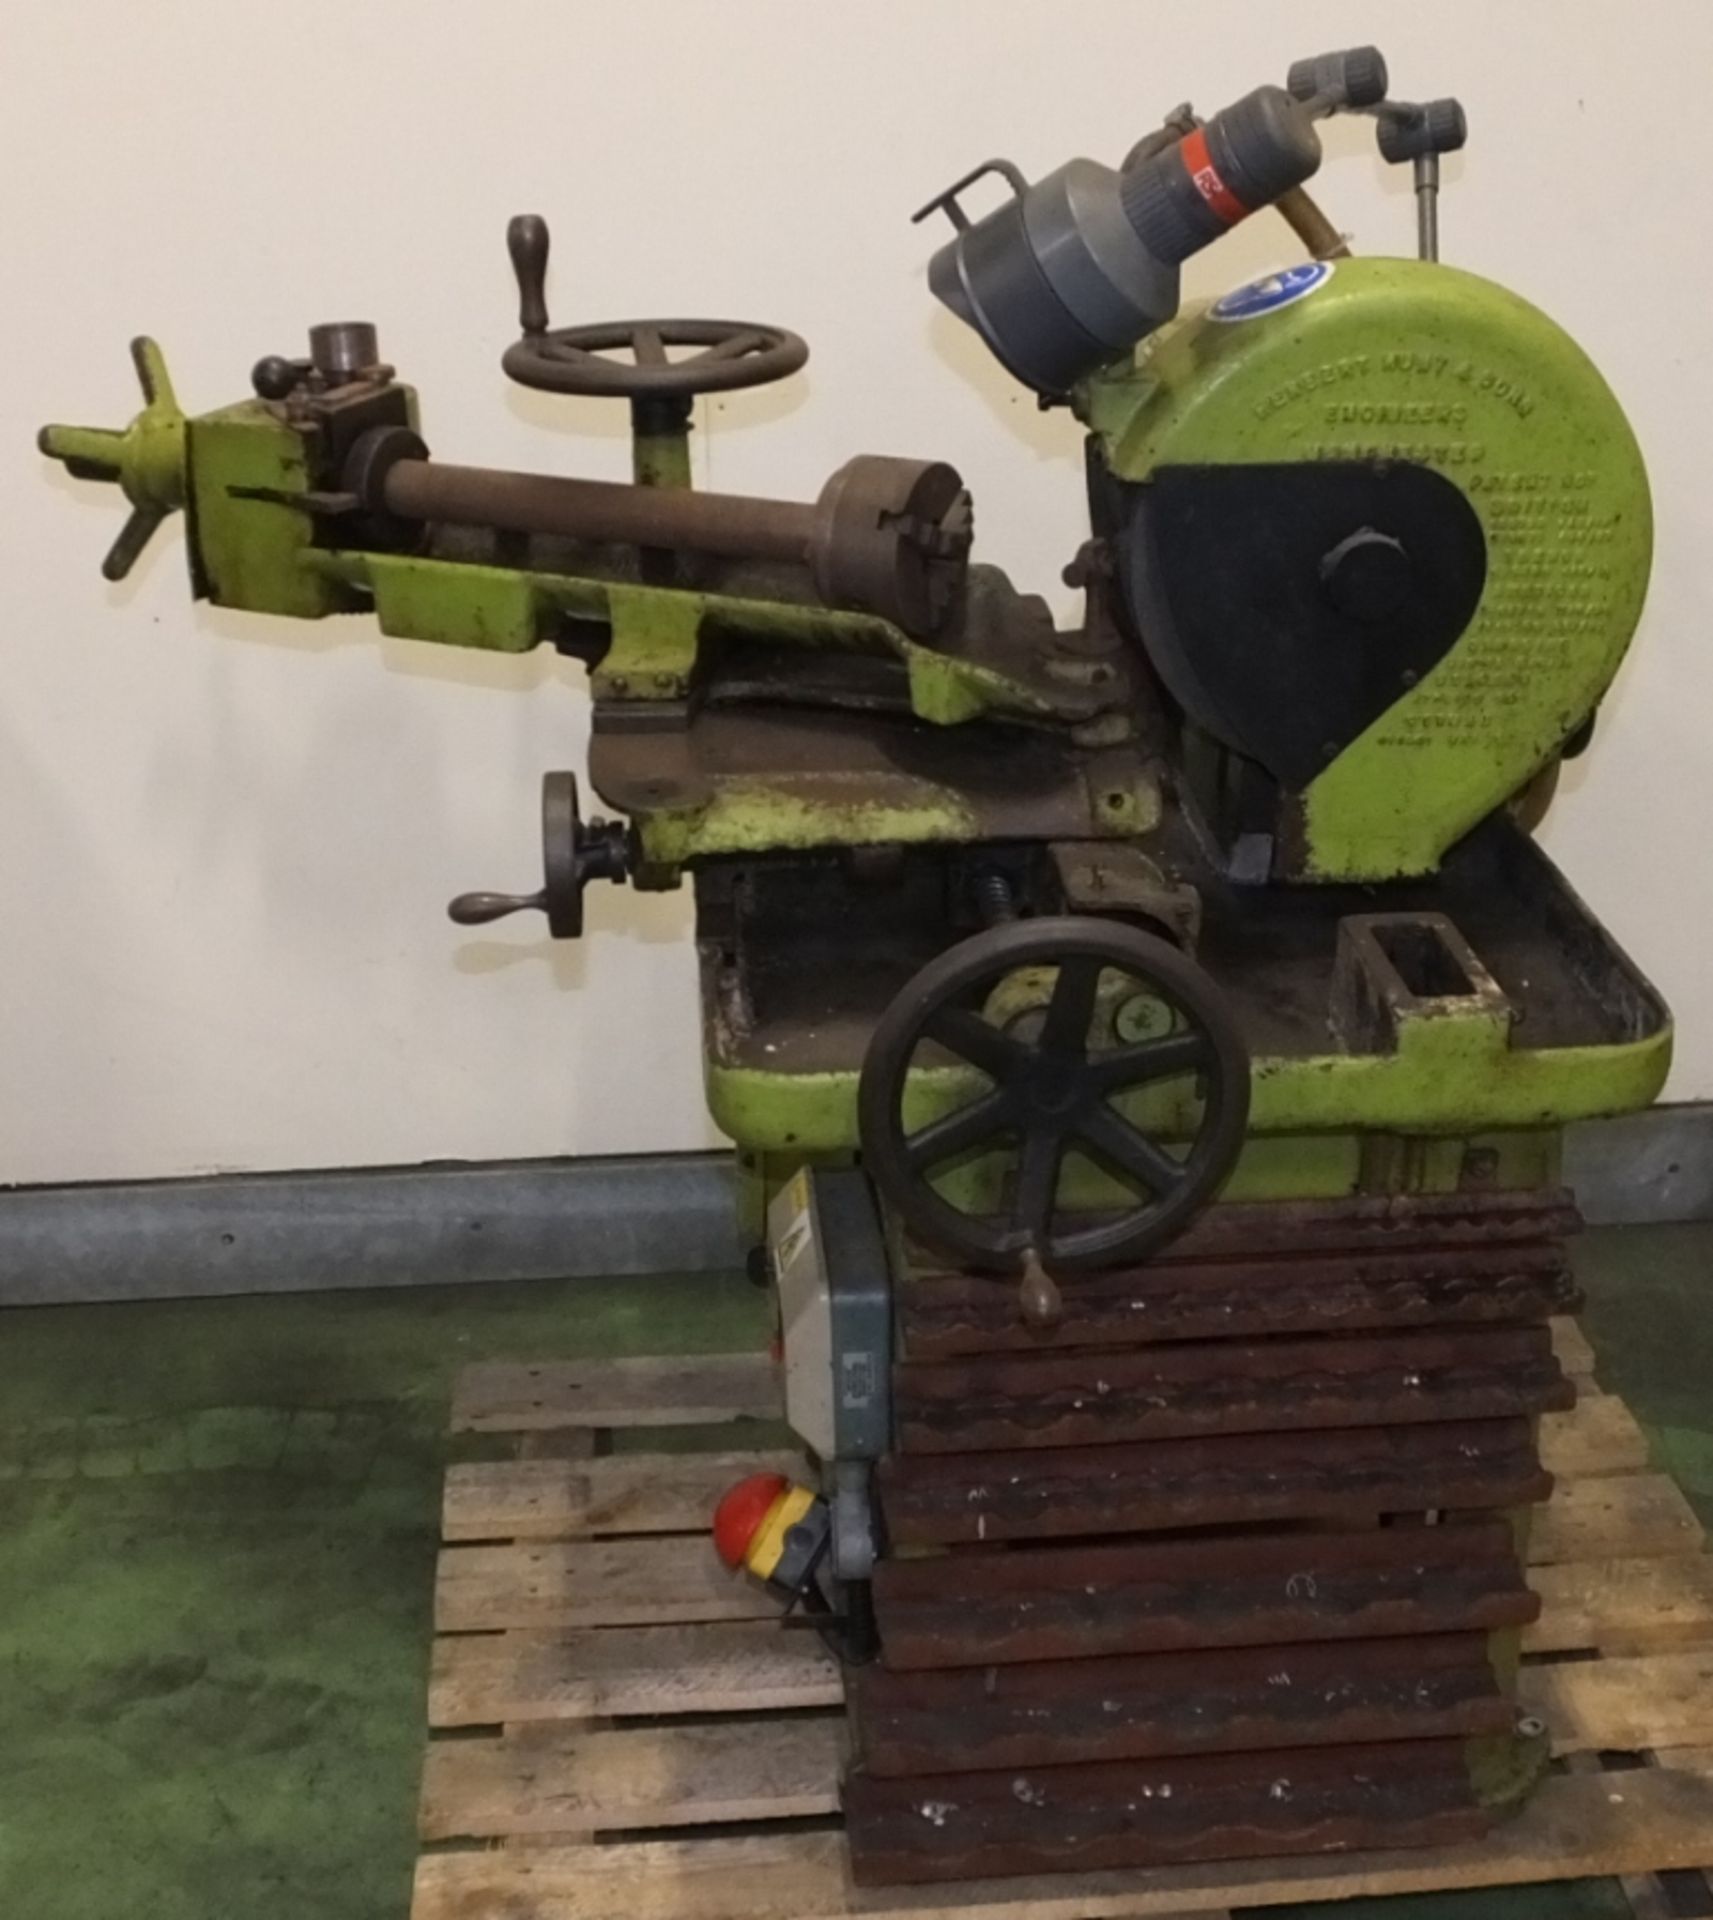 Herbert Hunt & Sons Drill Sharpening Machine - £5 Loading Charge Applied to this lot